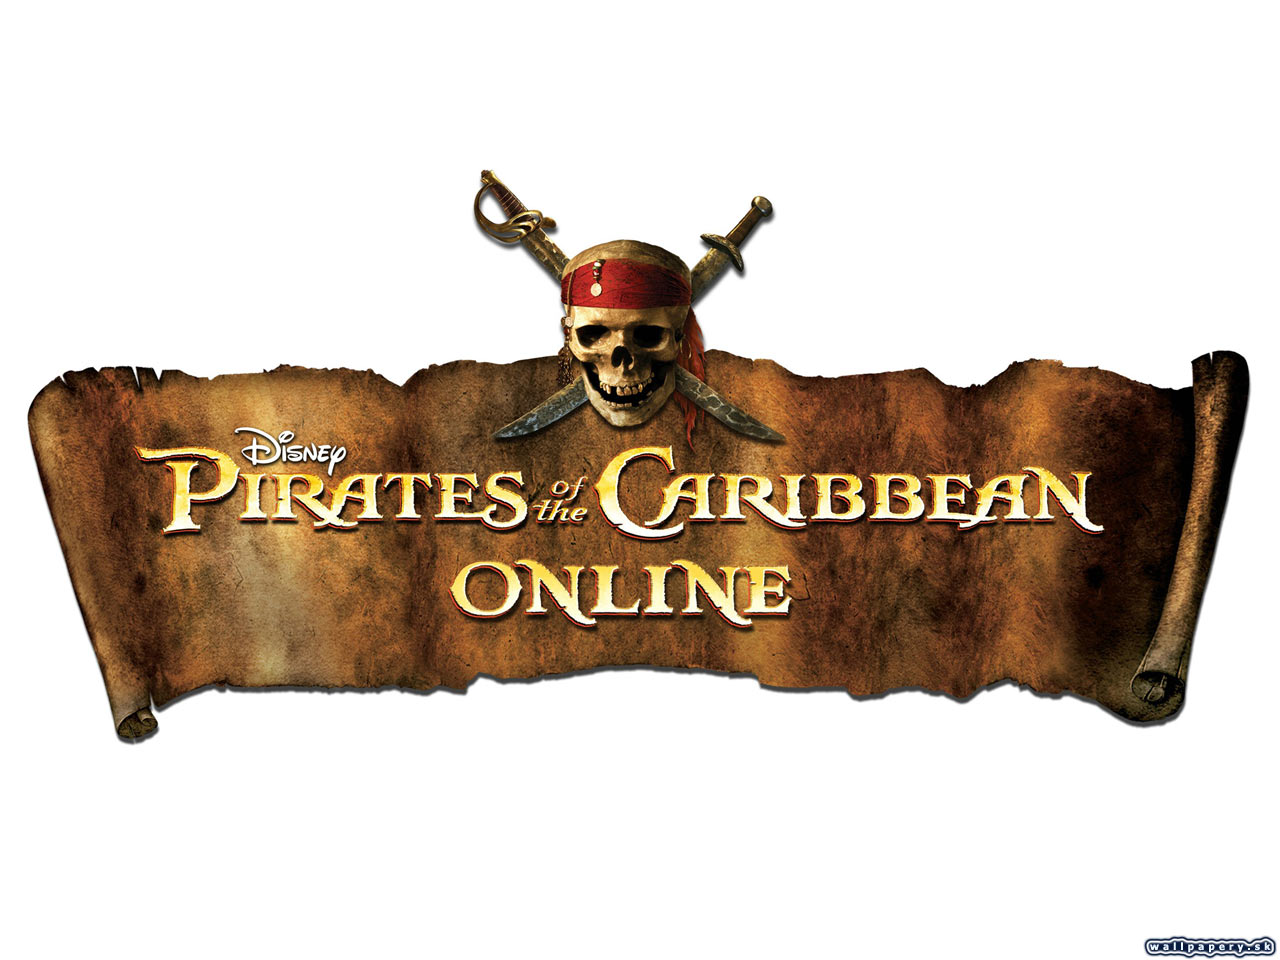 Pirates of the Caribbean Online - wallpaper 7